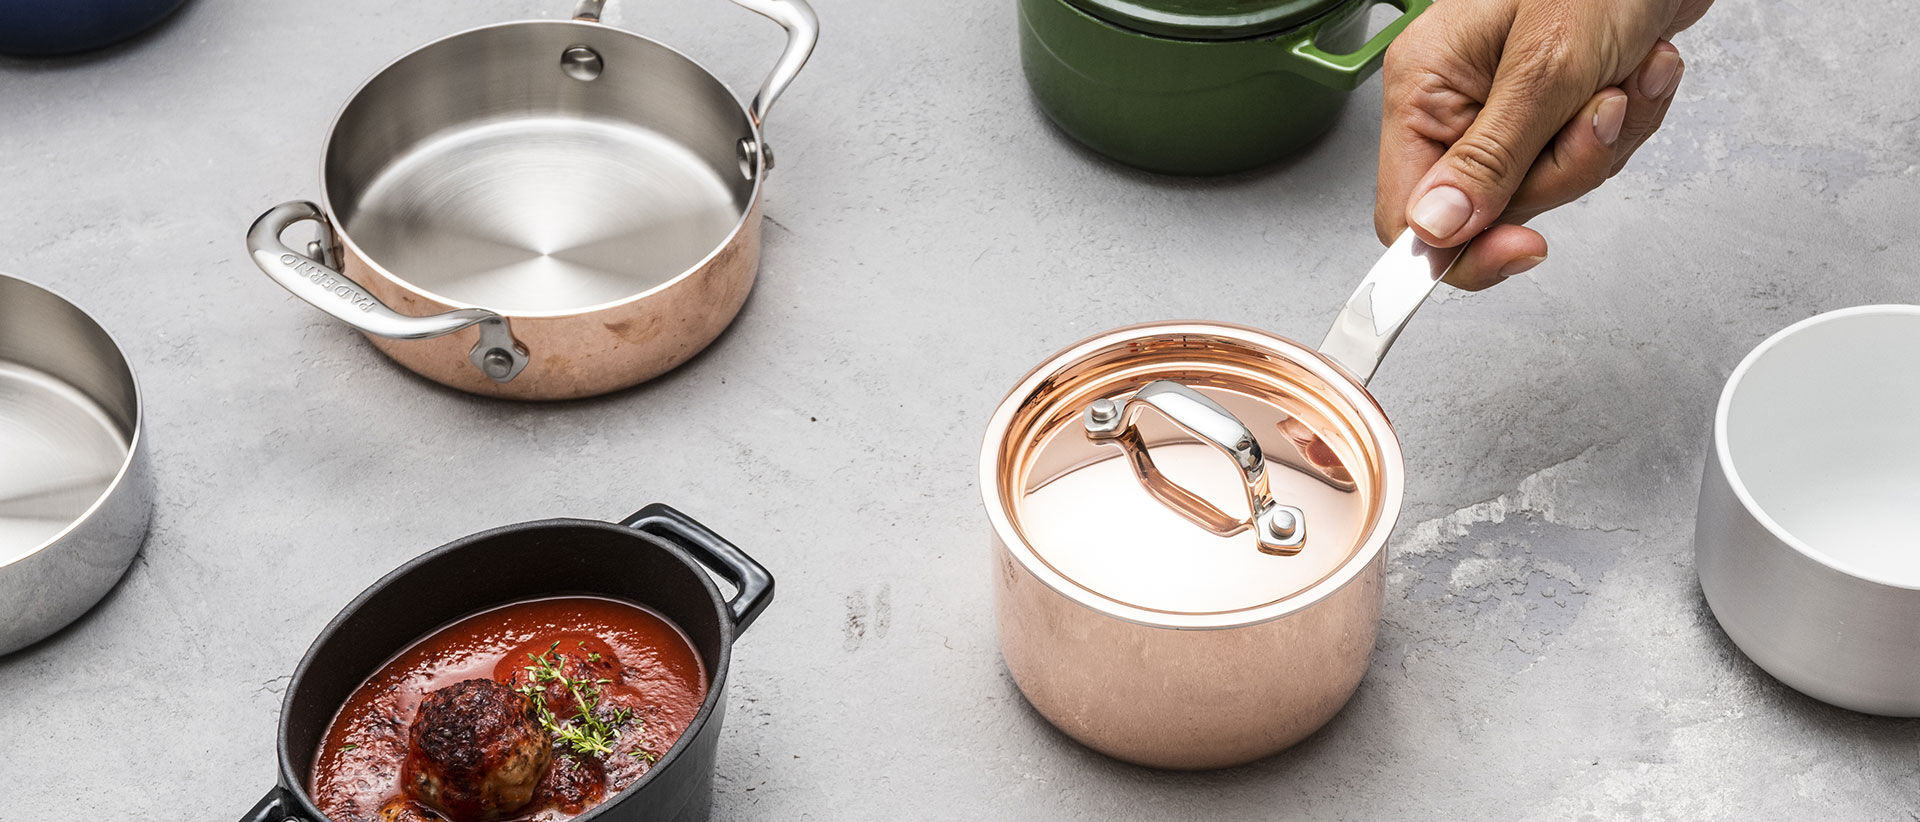 Single-portion pots and pans for serving at the table in style